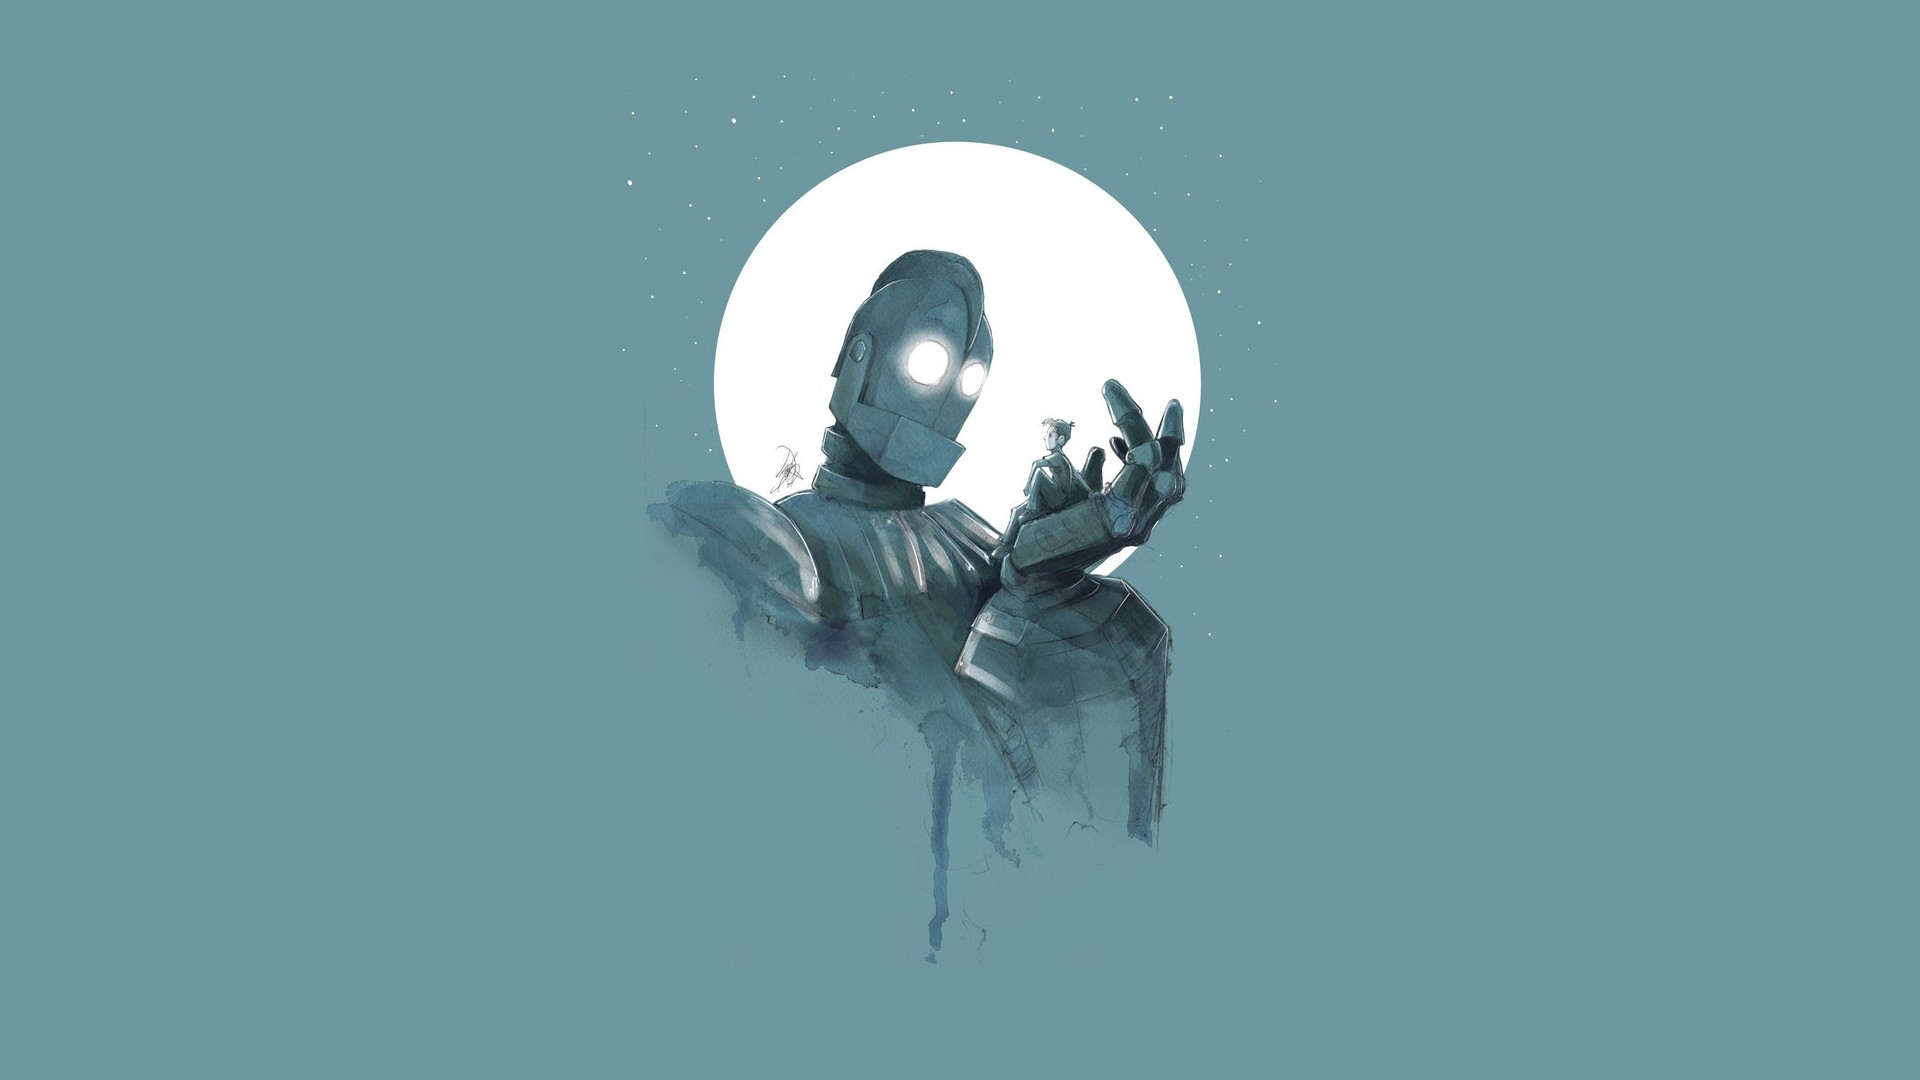 General 1920x1080 minimalism movies Moon robot simple background The Iron Giant animated movies